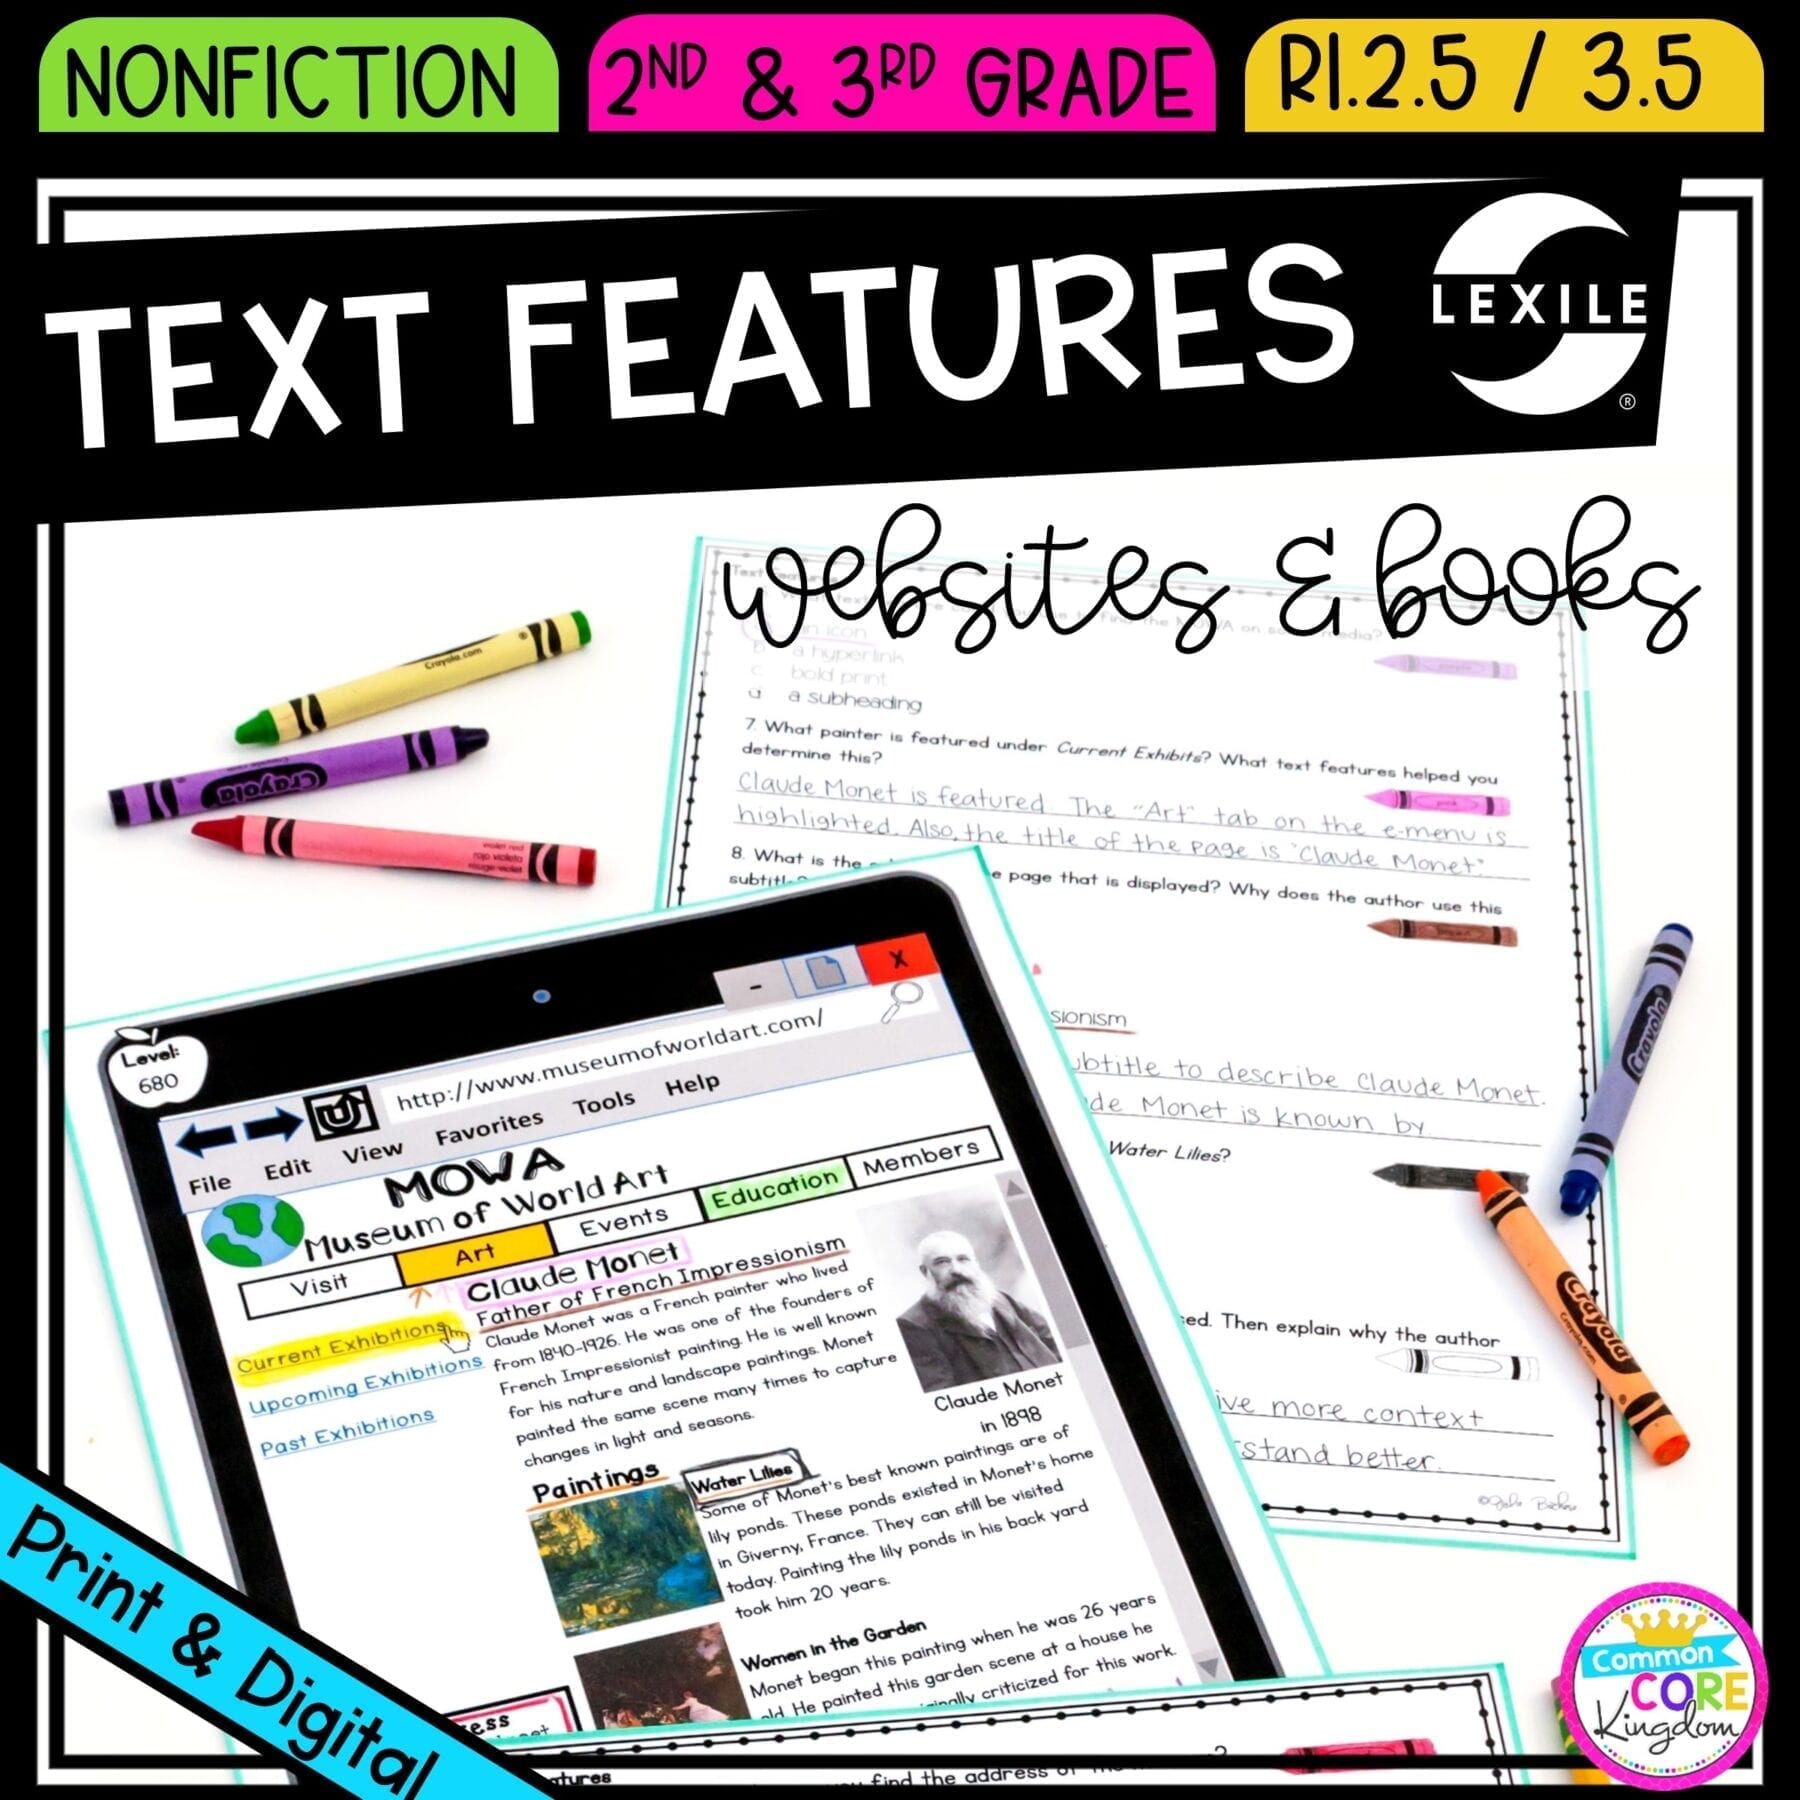 Nonfiction Text Features for 2nd and 3rd grade cover showing printable and digital worksheets